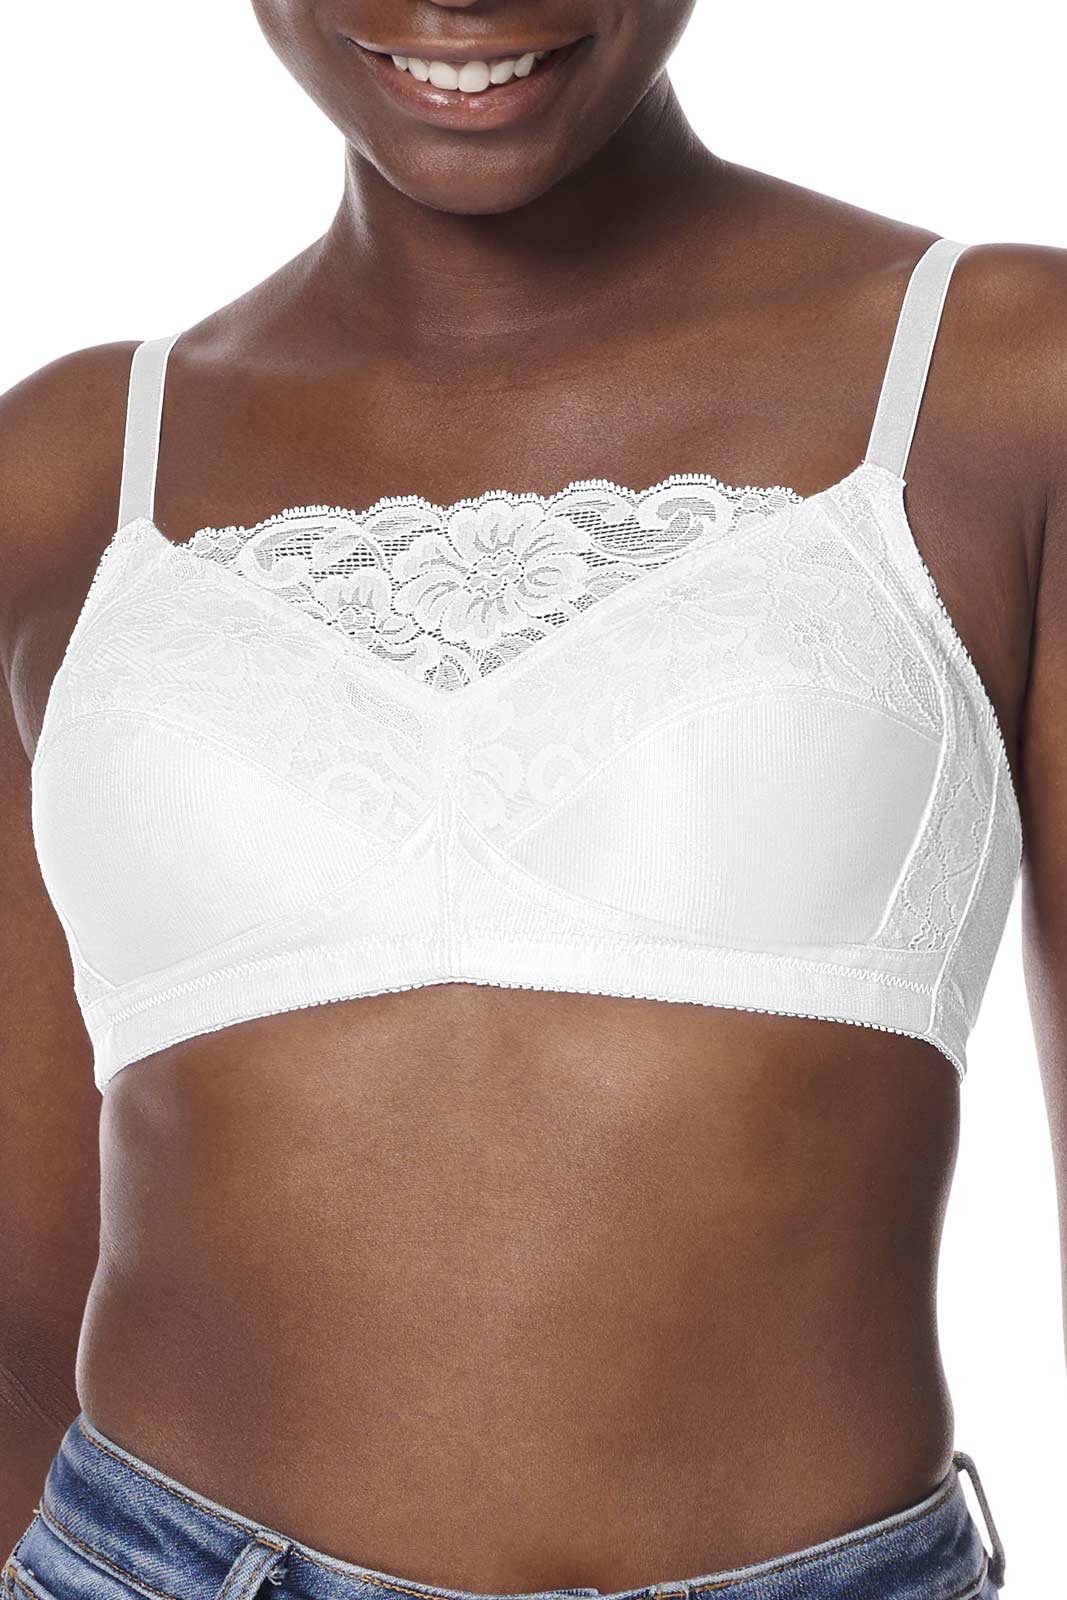 Brand Name CAMI TOP + UNDERWIRE Bra 40C (Stretch-Lace) COMFORT White NEW  SEALED - International Society of Hypertension